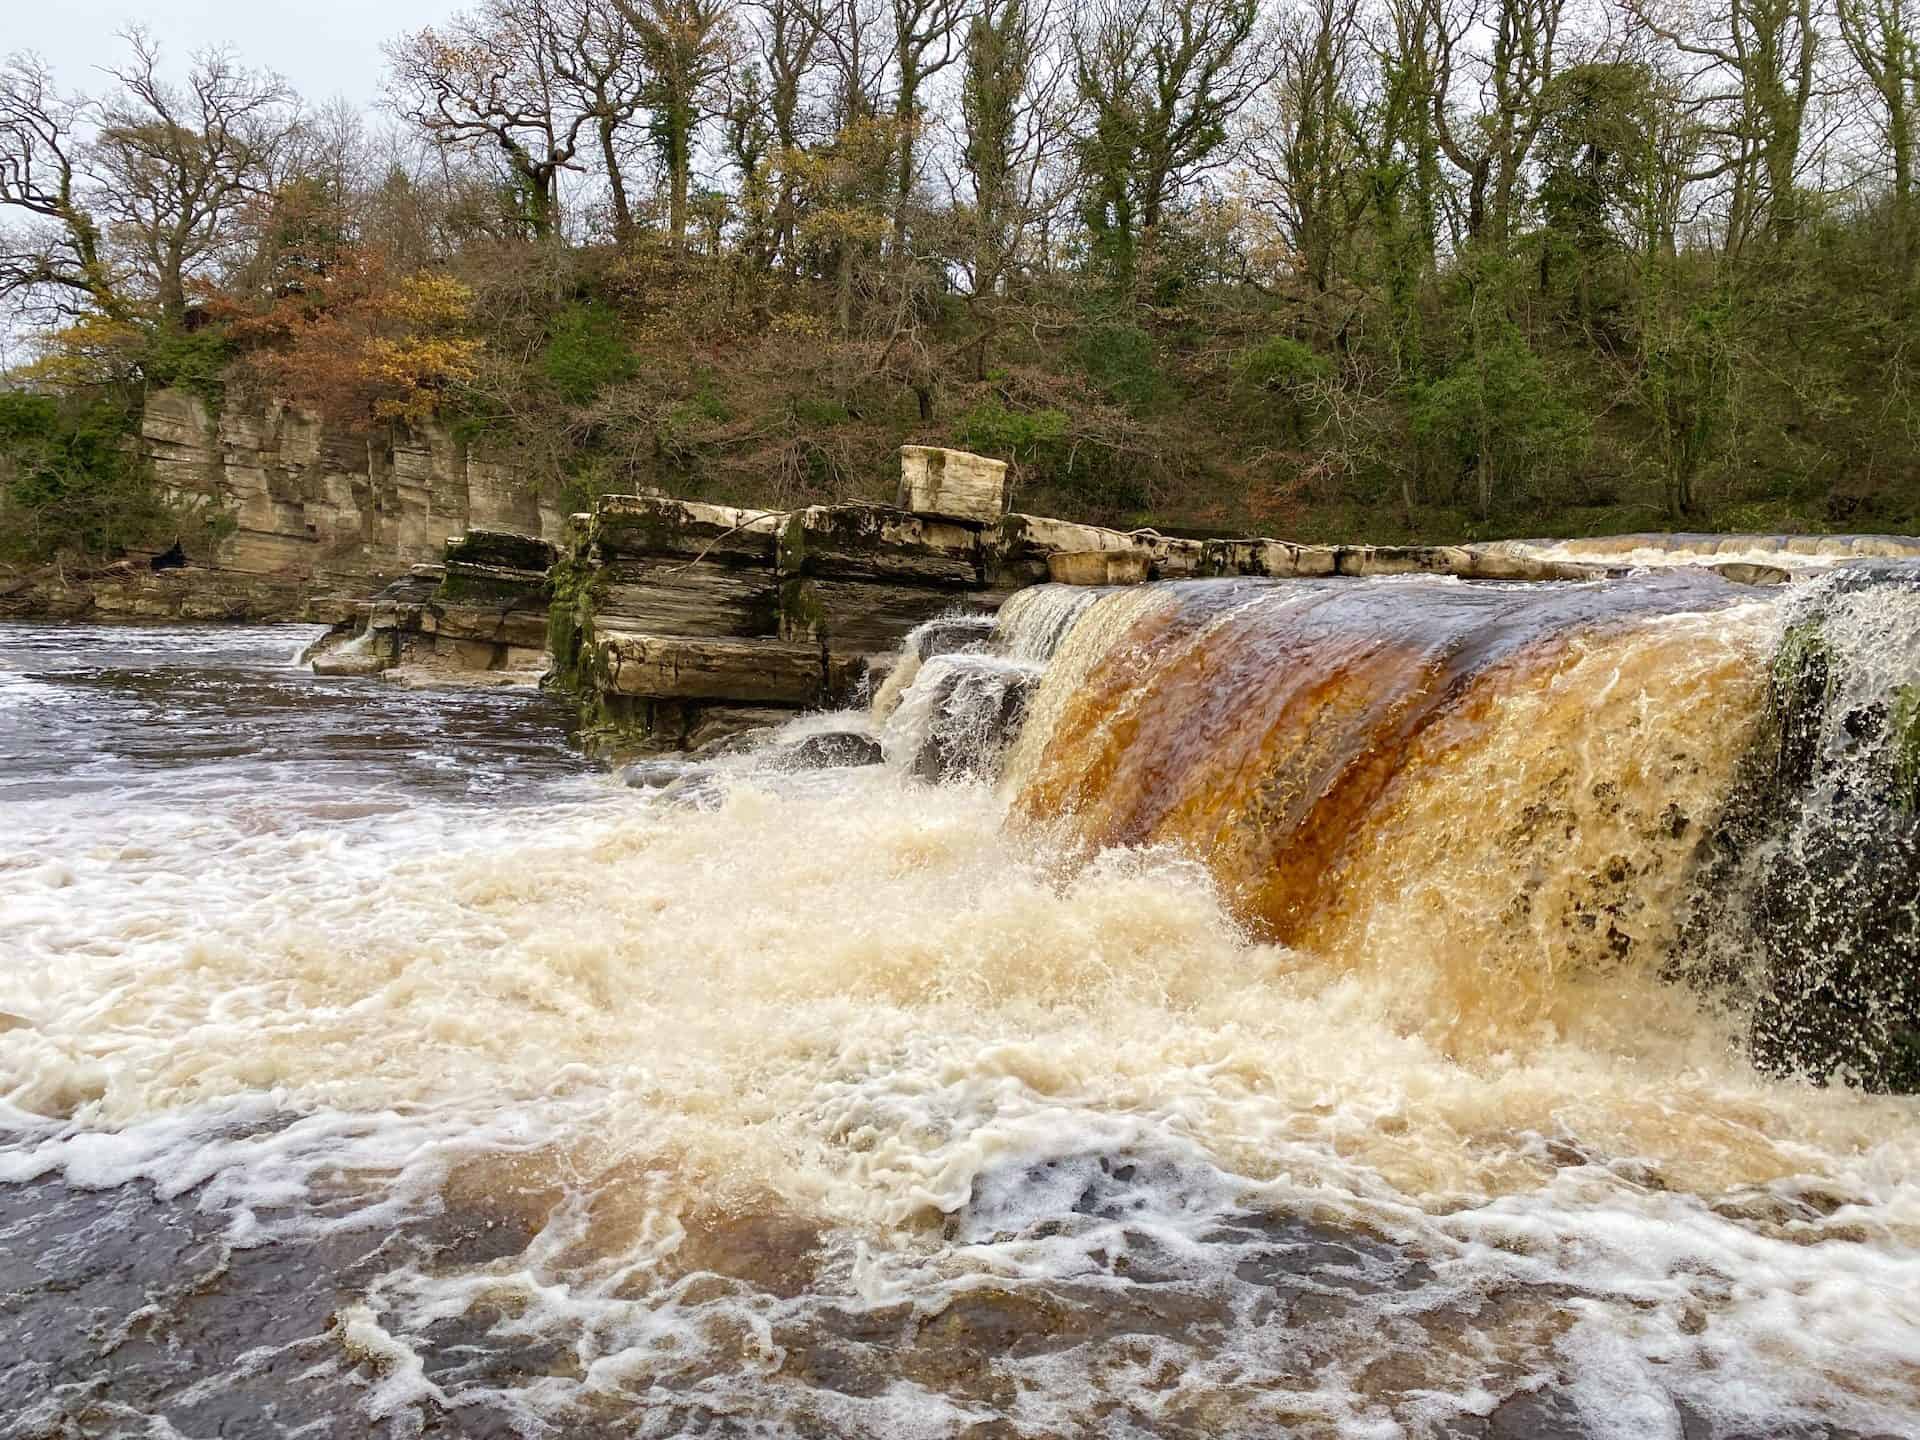 The River Swale is said to be England's fastest-flowing river. Sometimes golden brown in colour, particularly after heavy rainfall, because its waters have absorbed peat high up on the moorlands of the Yorkshire Dales.